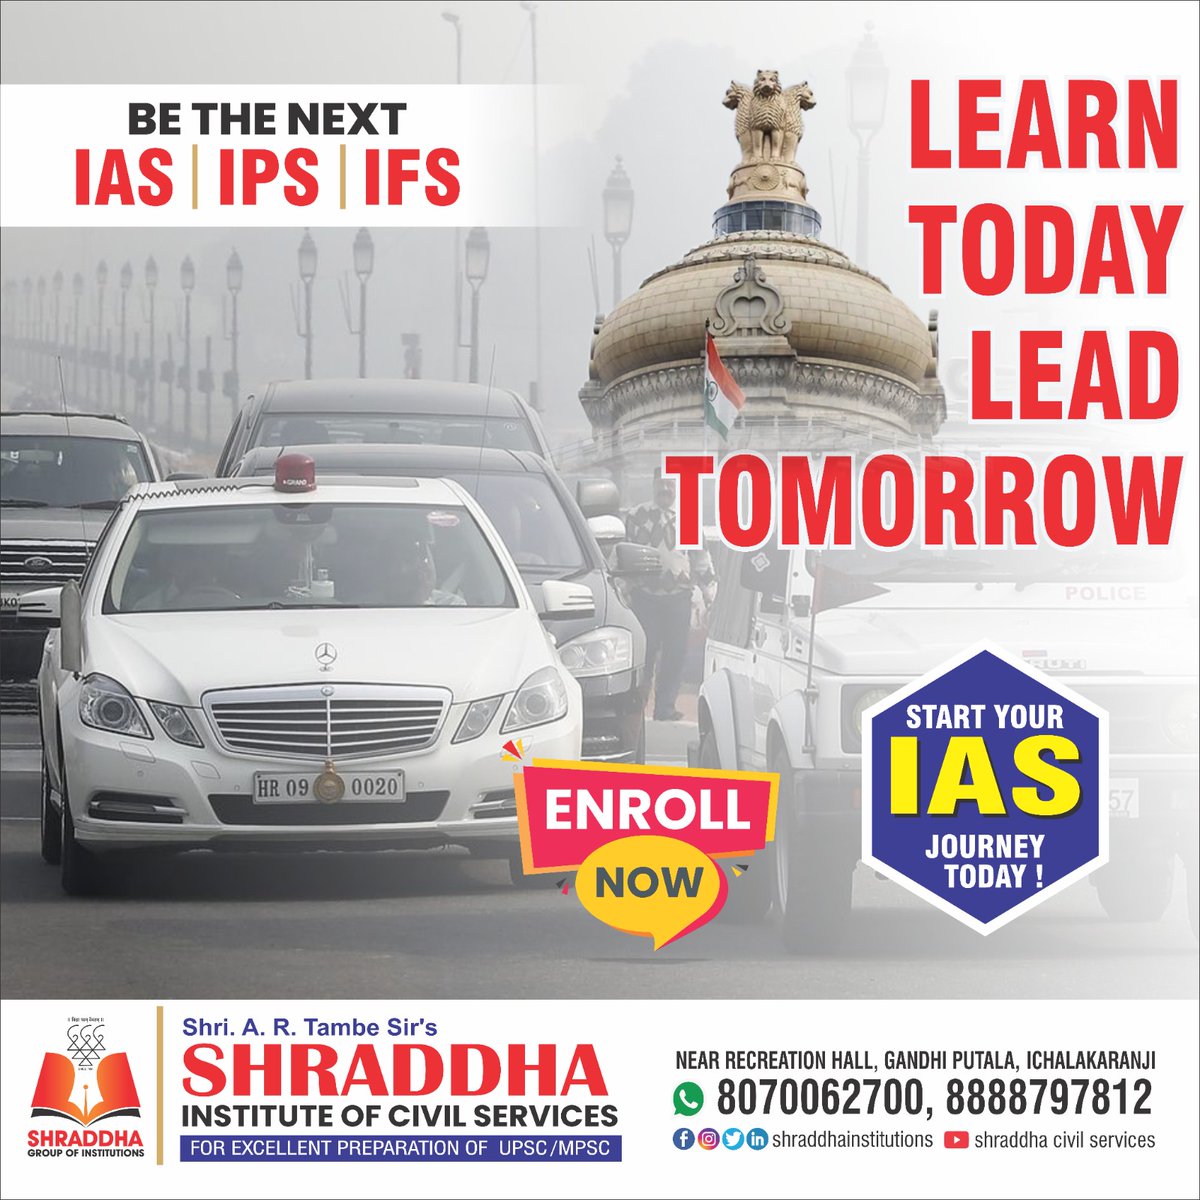 #LearnTodayLeadTomorrow Be the next IAS | IPS | IFS| 
Start Your IAS Journey Today !
Take the first step towards a distinguished career in public service with Shraddha Group of  Institute of Civil Services. 
#CivilServices #FutureLeaders #ShradhhaInstitute #UPSC #MPSC